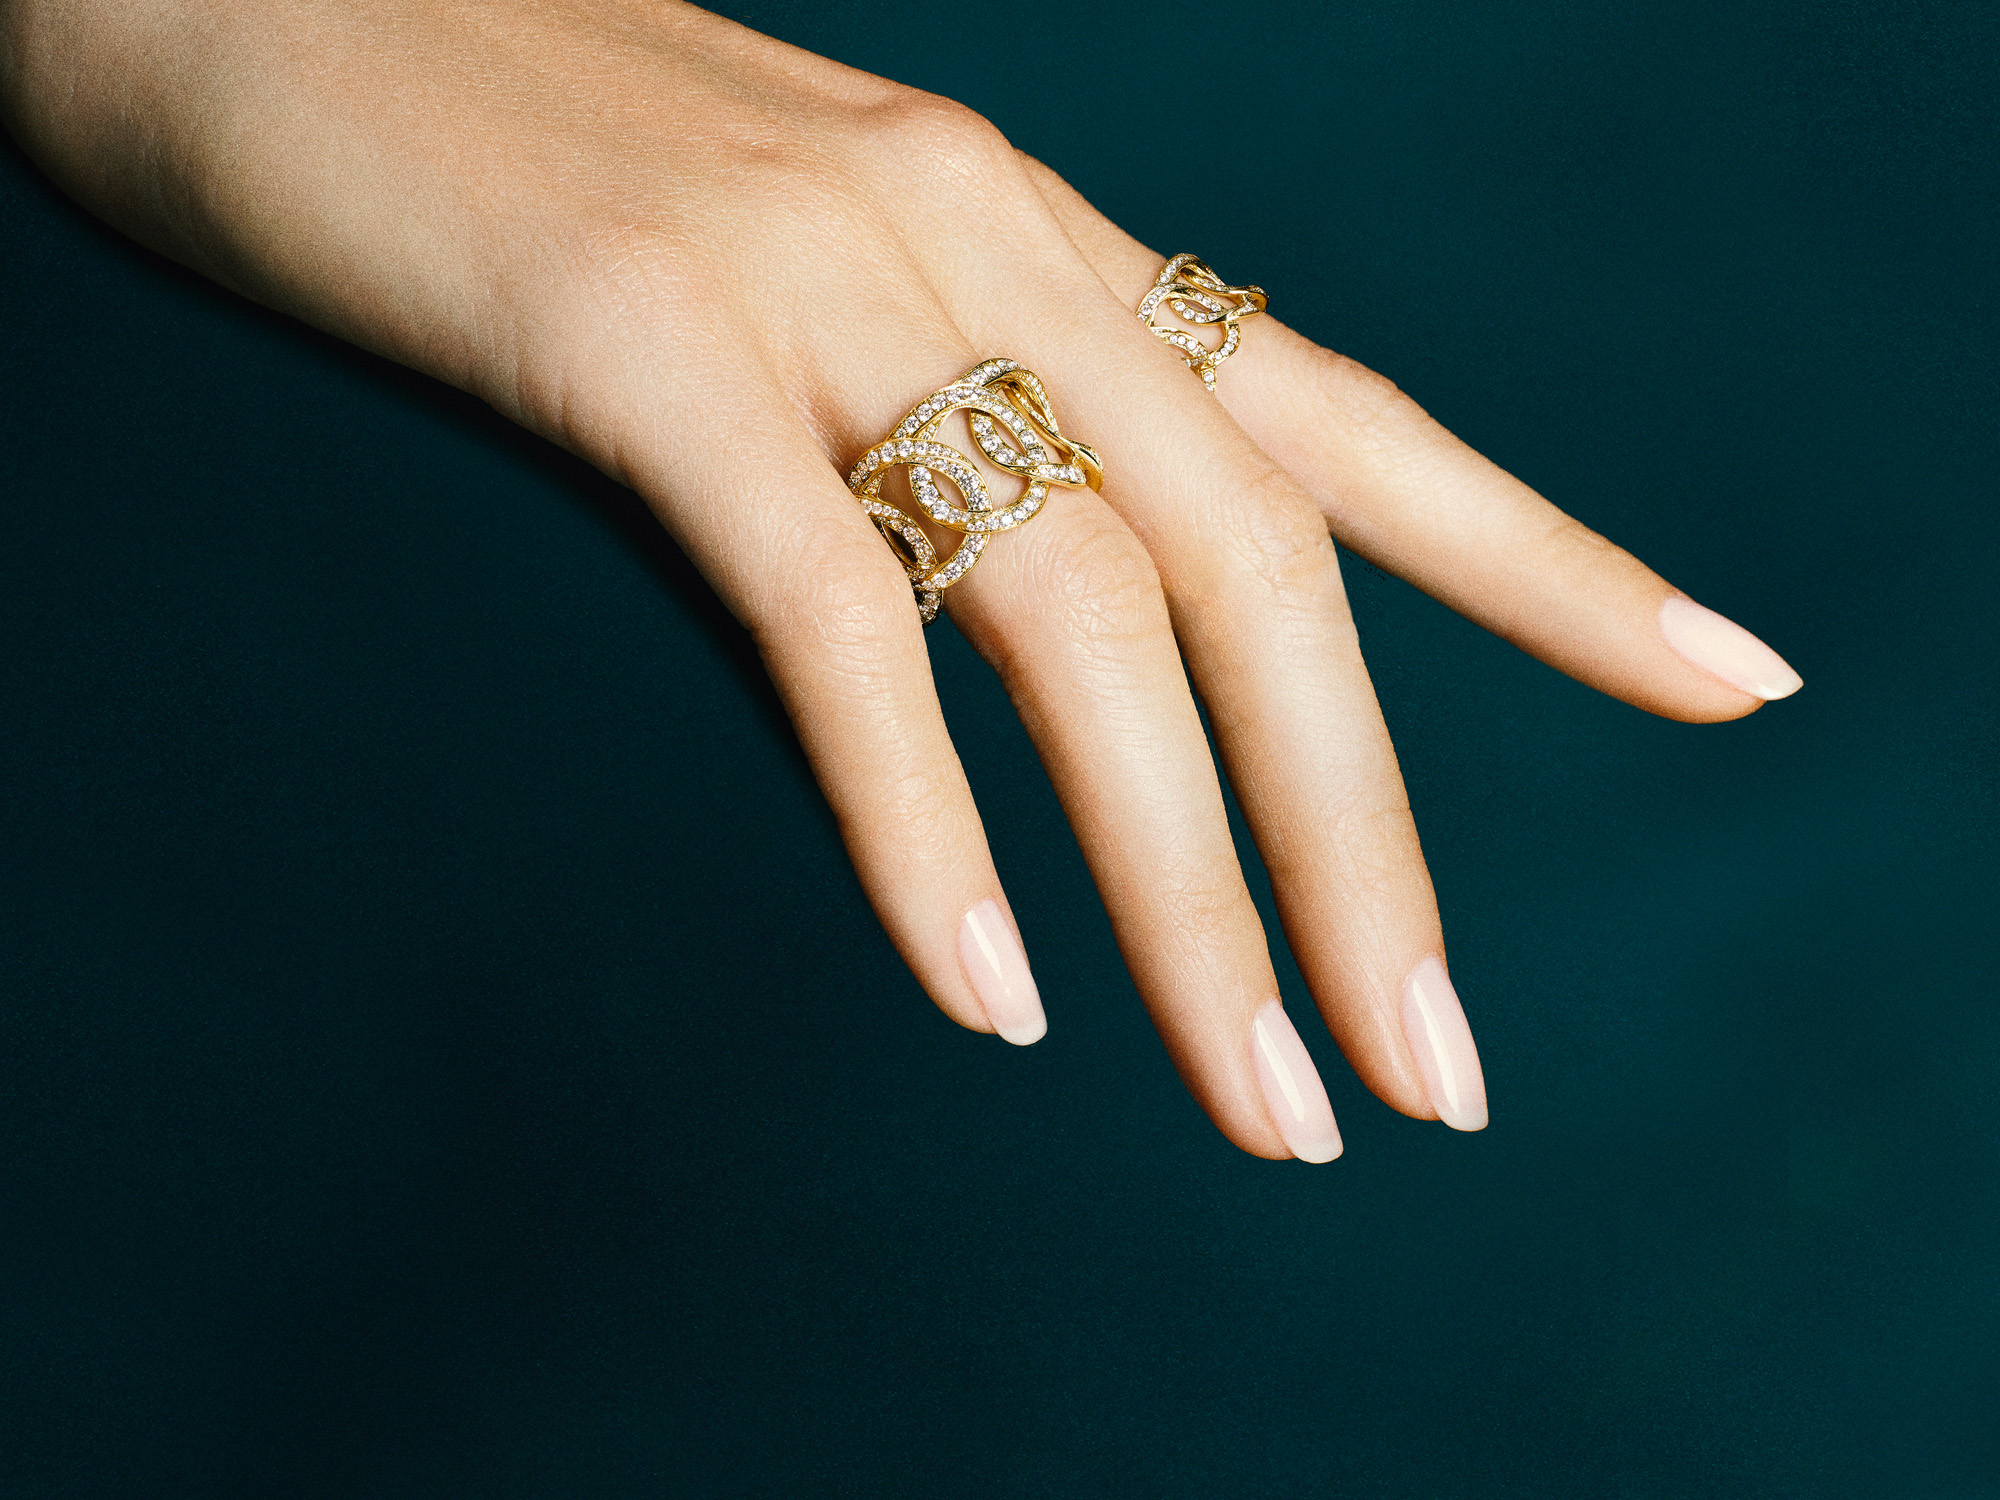 Model wears Inspired by Twombly rings from the Graff jewellery collection